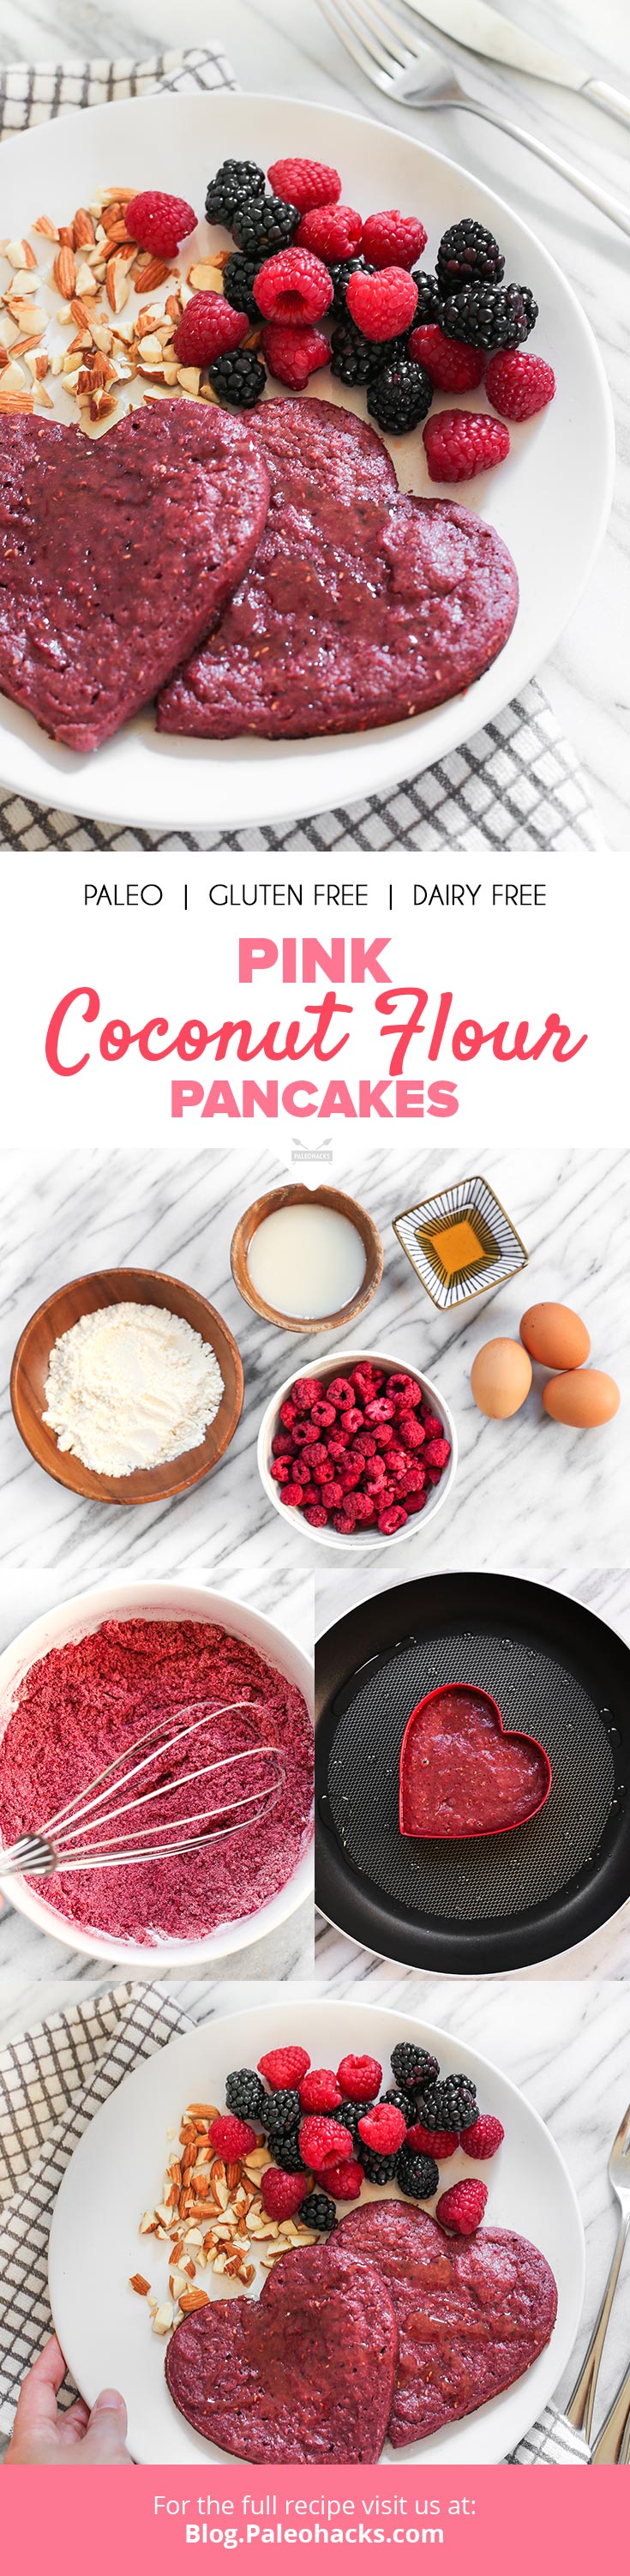 Get your griddle ready for these naturally pink coconut flour pancakes! To get that naturally pink hue, we used beetroot powder.